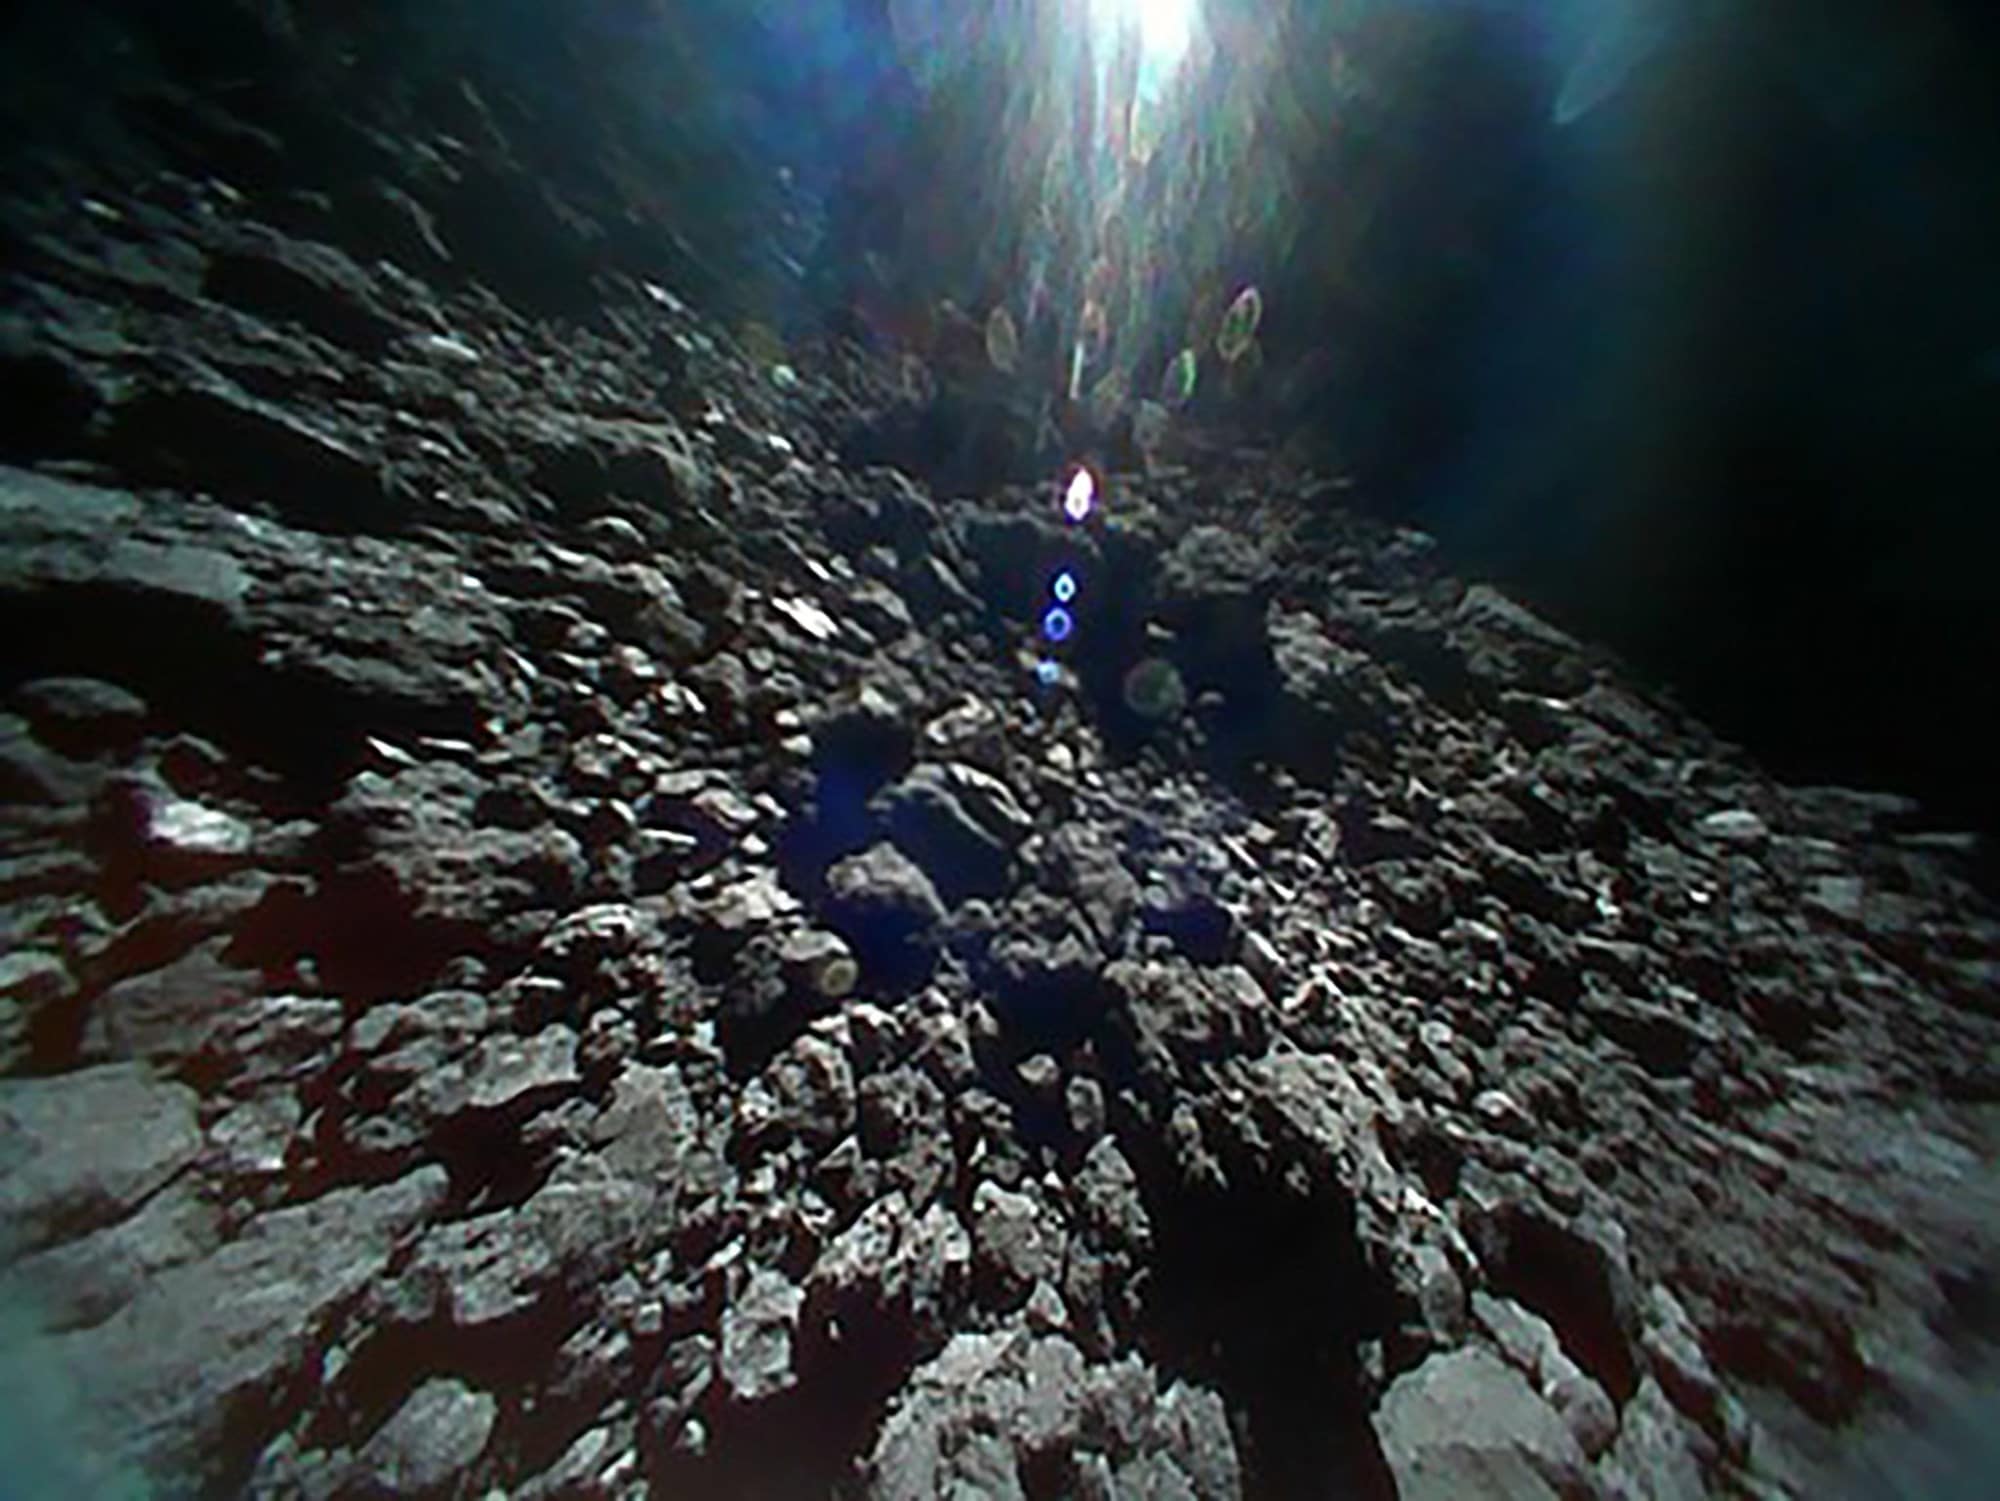 This photo of the asteroid Ryugu's surface was captured on Sept. 28, 2018 by one of the rovers released by Japan's Hayabusa 2 spacecraft.HANDOUT / AFP - Getty Images